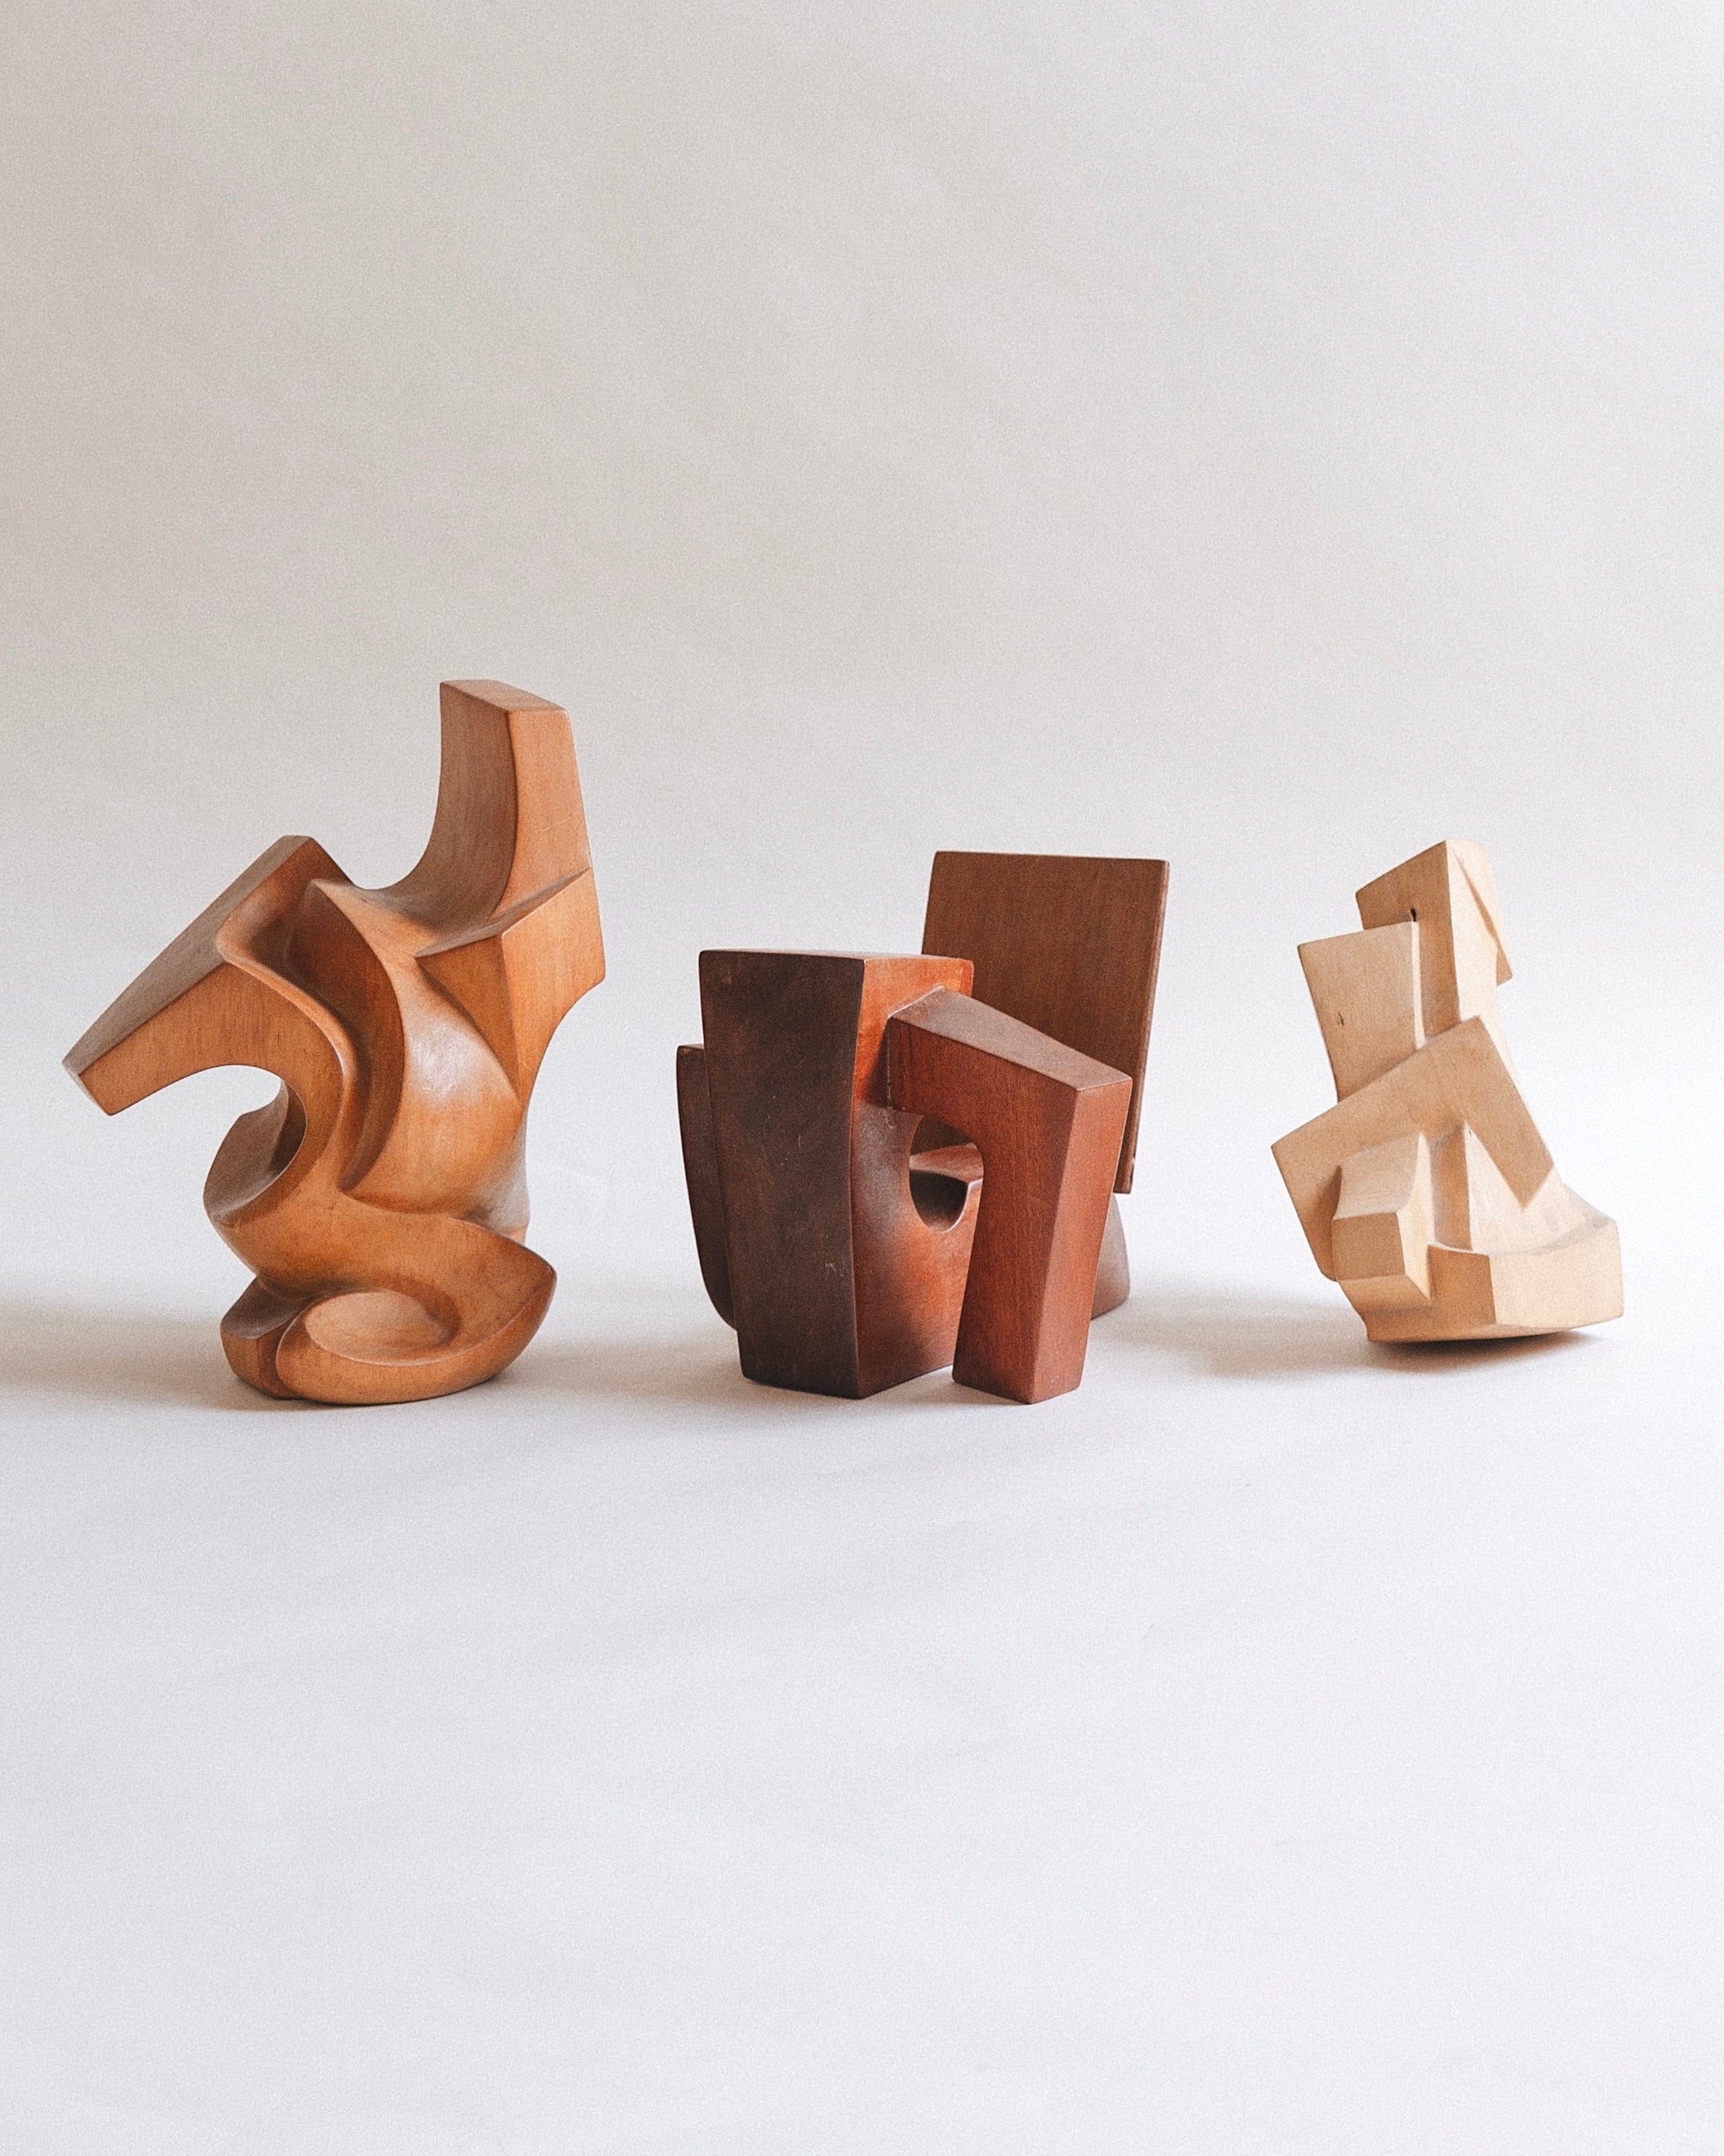 Trio Of Carved Geometric Sculptures